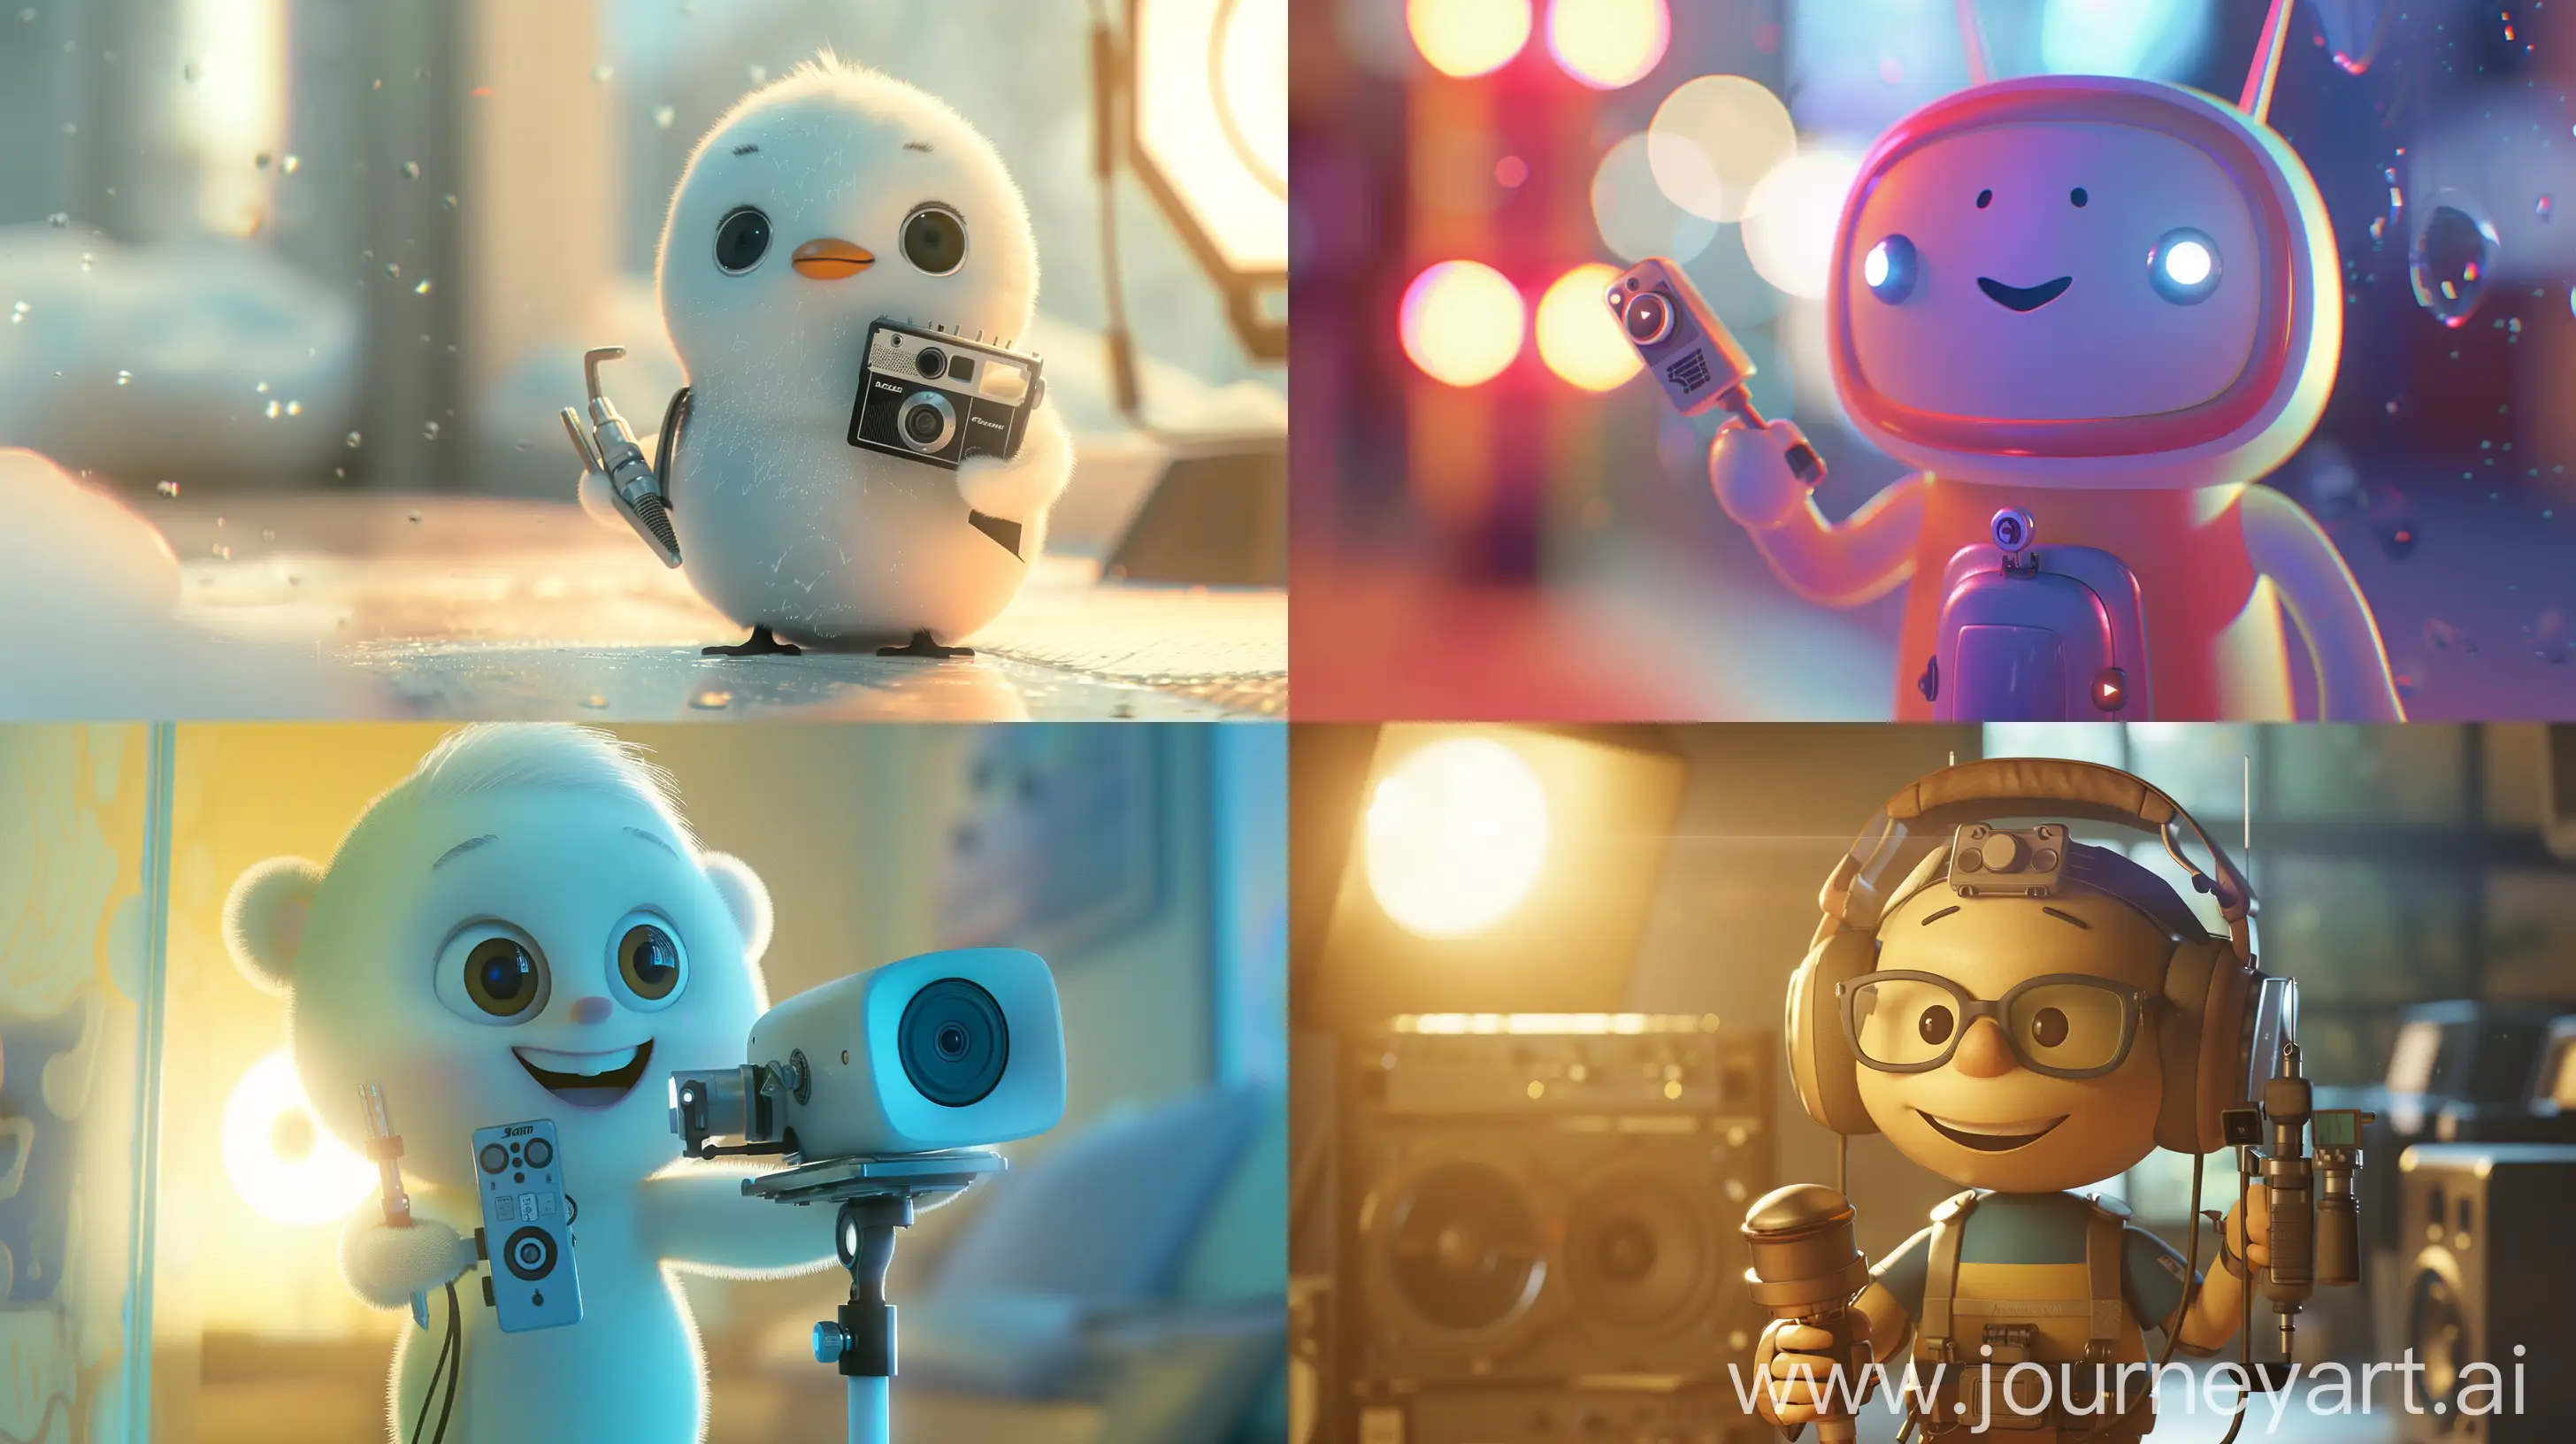 Adorable-Company-Mascot-Guarding-Safety-with-Audio-and-Video-Tools-in-Pixar-Style